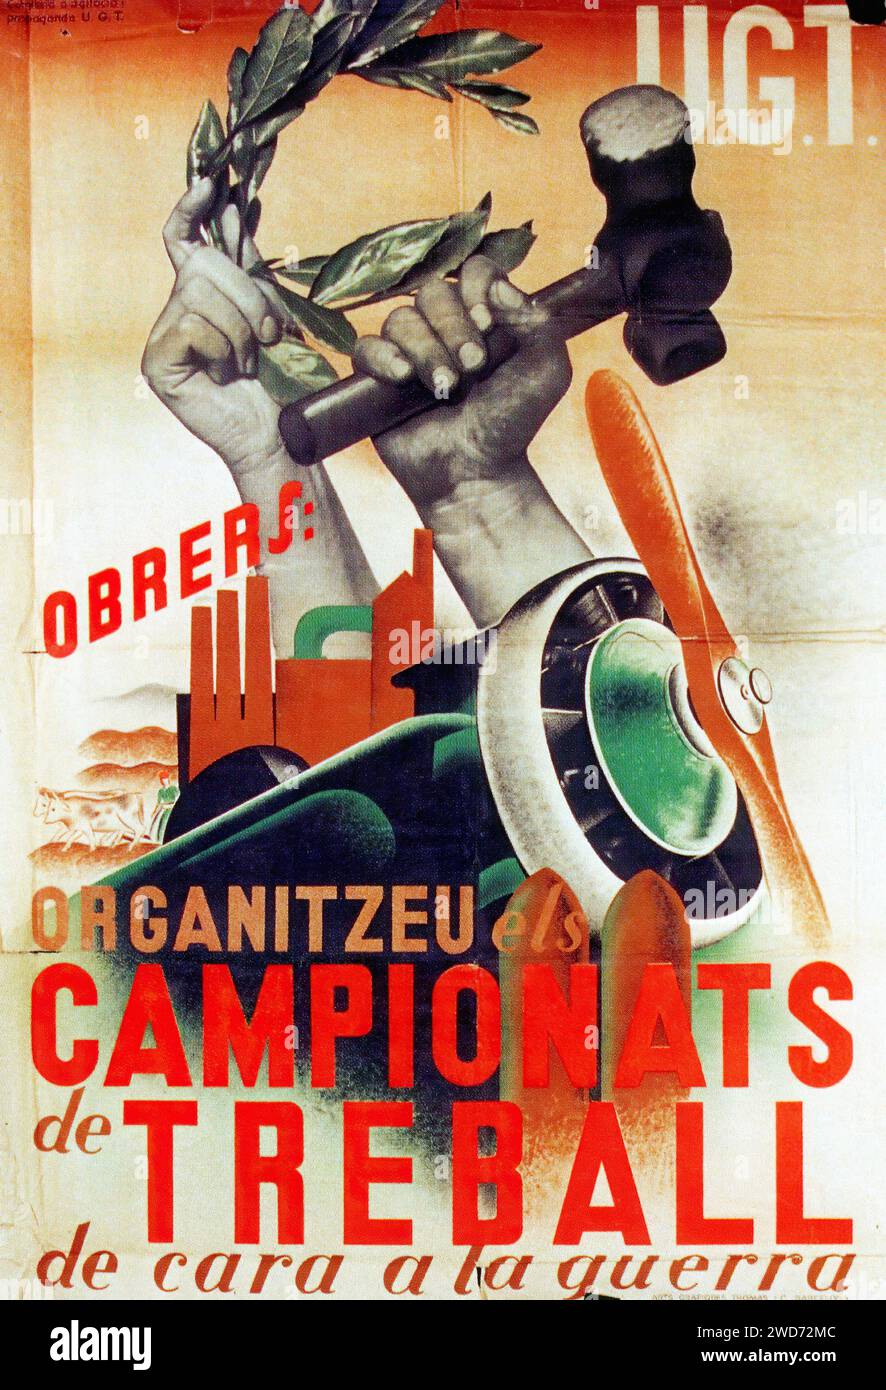 'OBRERS: ORGANITZEU CAMPIONATS de TREBALL de cara a la guerra' Translation: 'WORKERS: ORGANIZE WORK COMPETITIONS in the face of war' Description: Hands clasping a laurel branch and a hammer in front of industrial and rural landscapes. Graphic Style: Social Realism with a focus on labor and solidarity, featuring strong, idealized forms.   - Spanish Civil War (Guerra Civil Española) Propaganda Poster Stock Photo